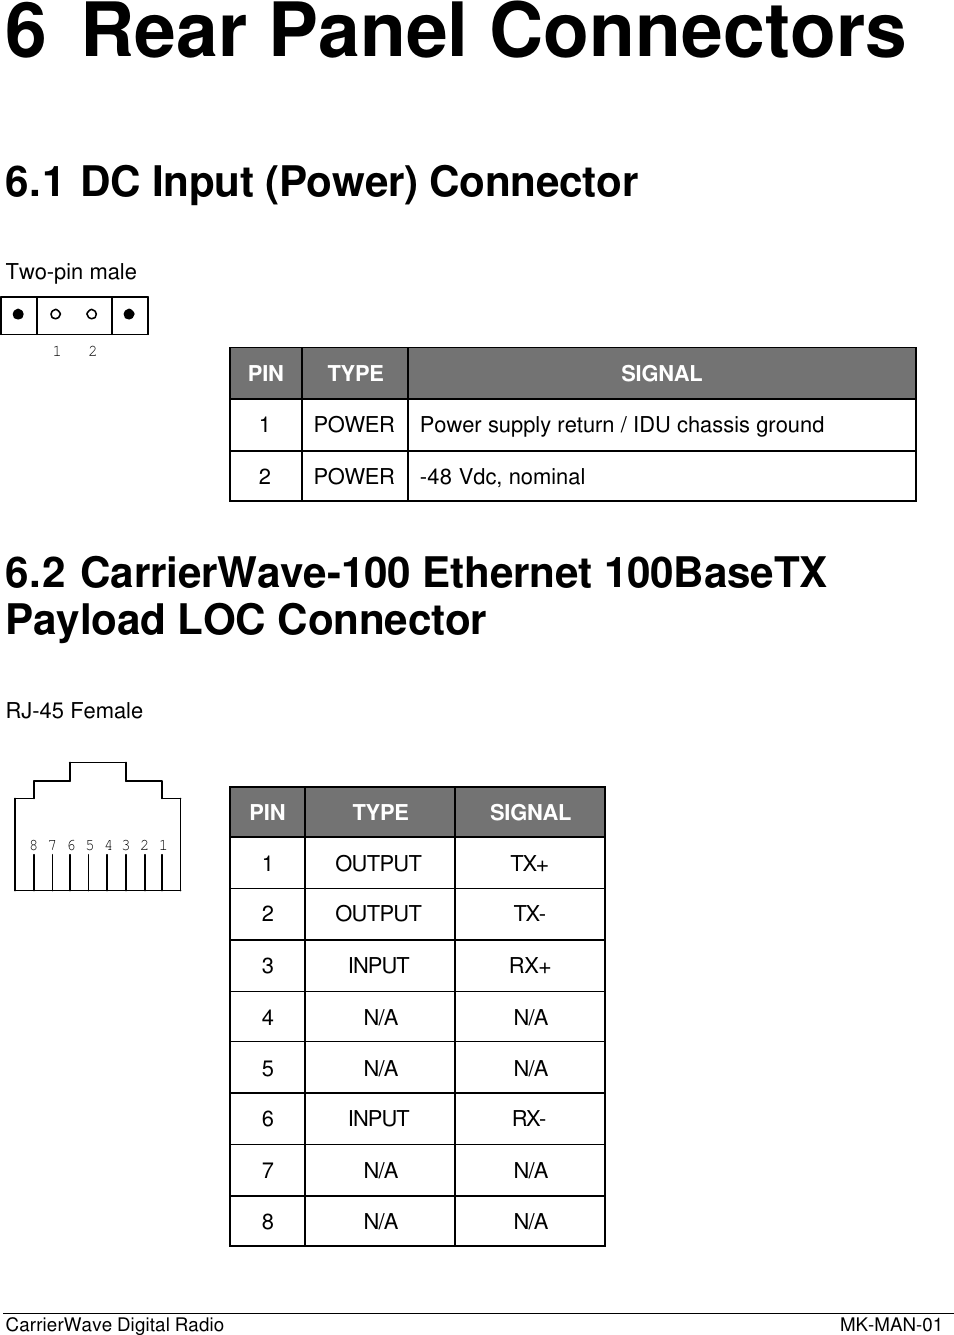 CarrierWave Digital Radio  MK-MAN-016 Rear Panel Connectors6.1 DC Input (Power) ConnectorTwo-pin malePIN TYPE SIGNAL1POWER Power supply return / IDU chassis ground2POWER -48 Vdc, nominal6.2 CarrierWave-100 Ethernet 100BaseTXPayload LOC ConnectorRJ-45 FemalePIN TYPE SIGNAL1OUTPUT TX+2OUTPUT TX-3INPUT RX+4N/A N/A5N/A N/A6INPUT RX-7N/A N/A8N/A N/A1 28 37 26 15 4